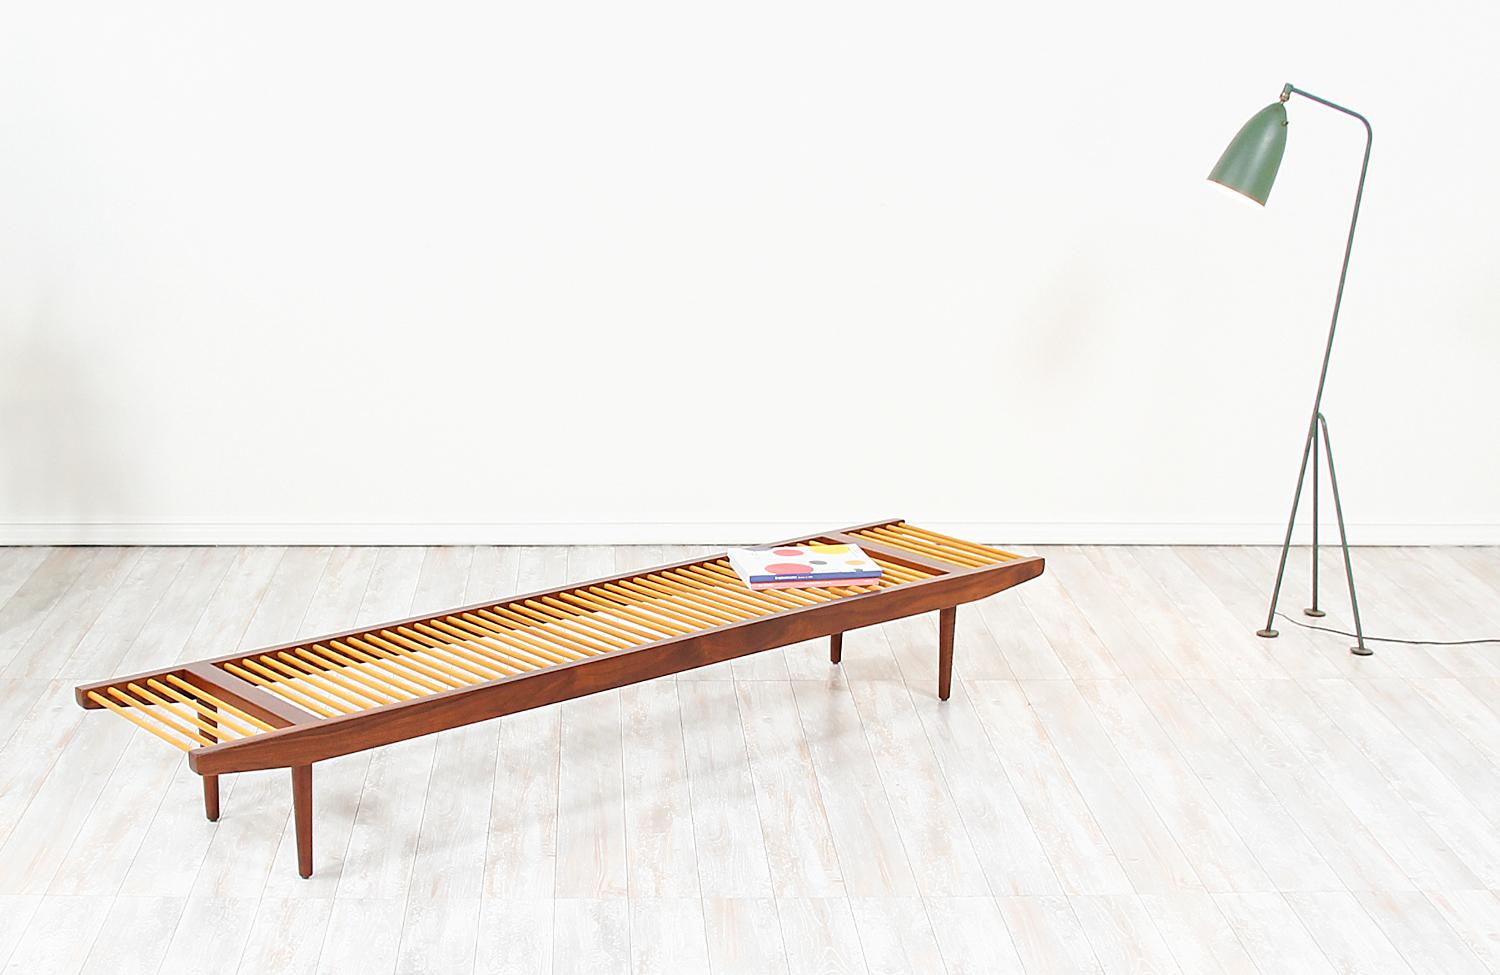 Elegant Californian Modern bench designed by Milo Baughman for Glenn of California in the United States, circa 1950s. This beautiful large dowel bench features a solid low profile frame and is comprised of a lovely contrast of walnut wood and